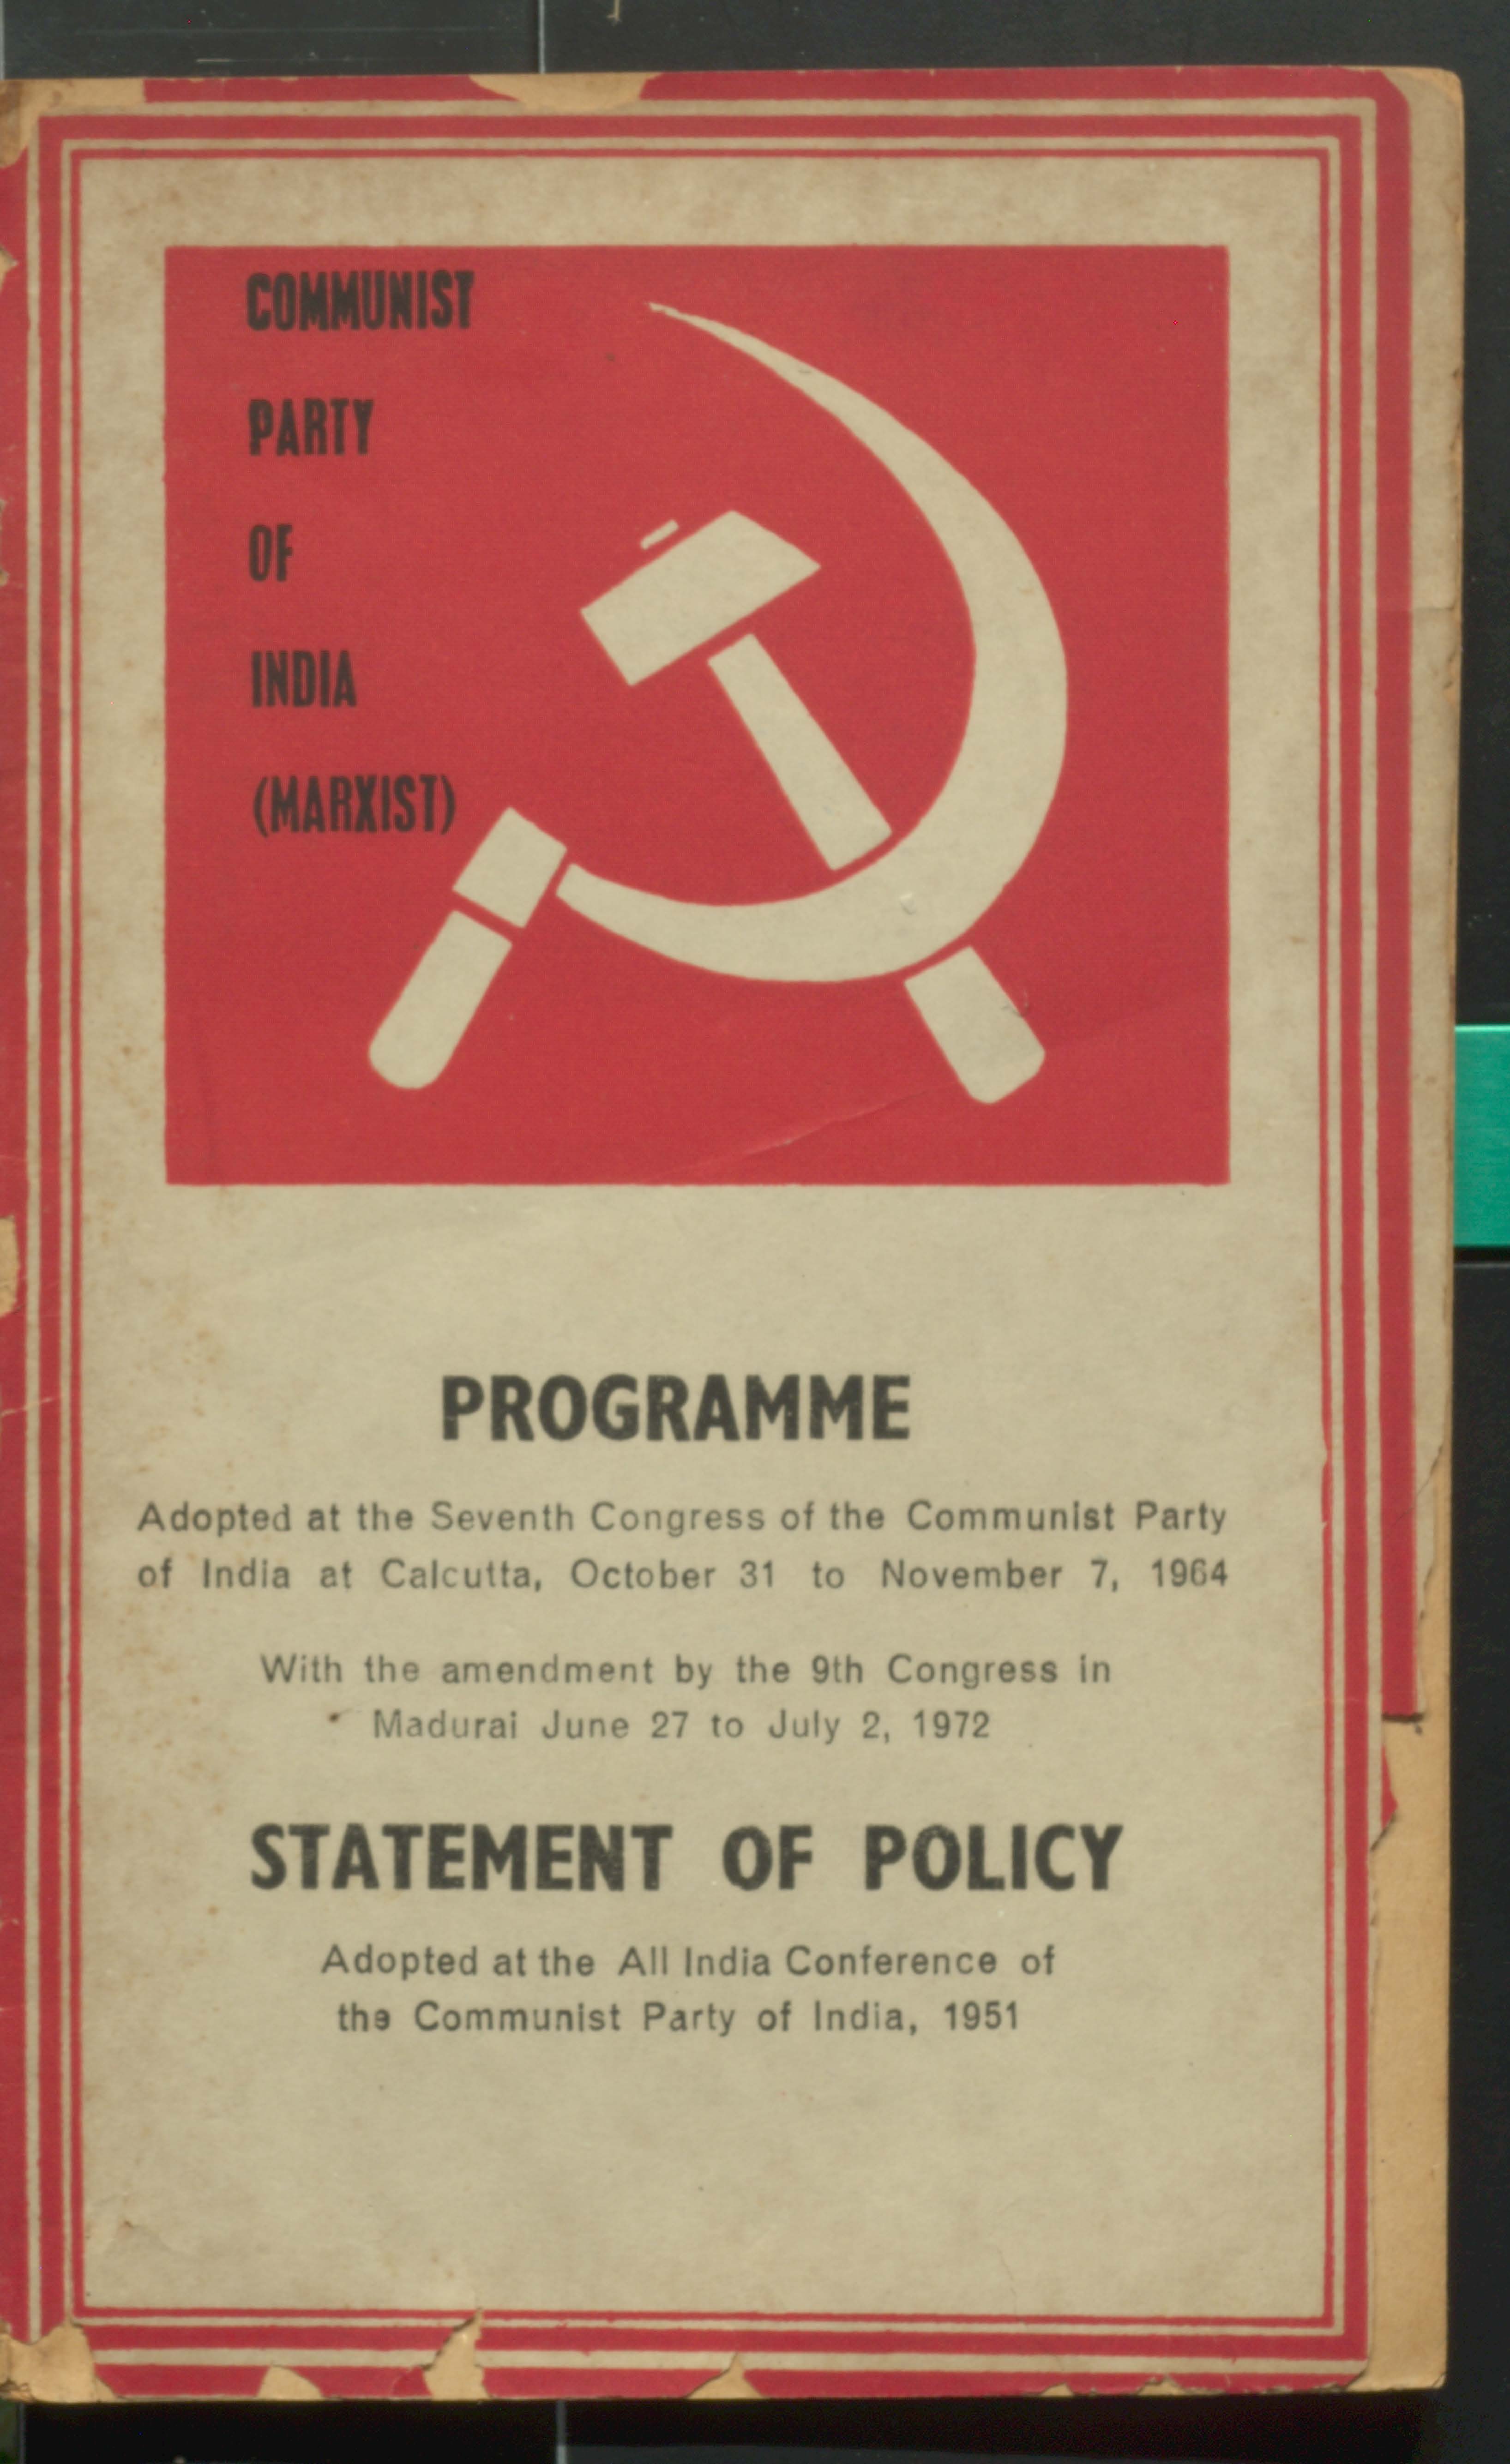 Programme statement of policy  (communist party of india)(marxist)1951